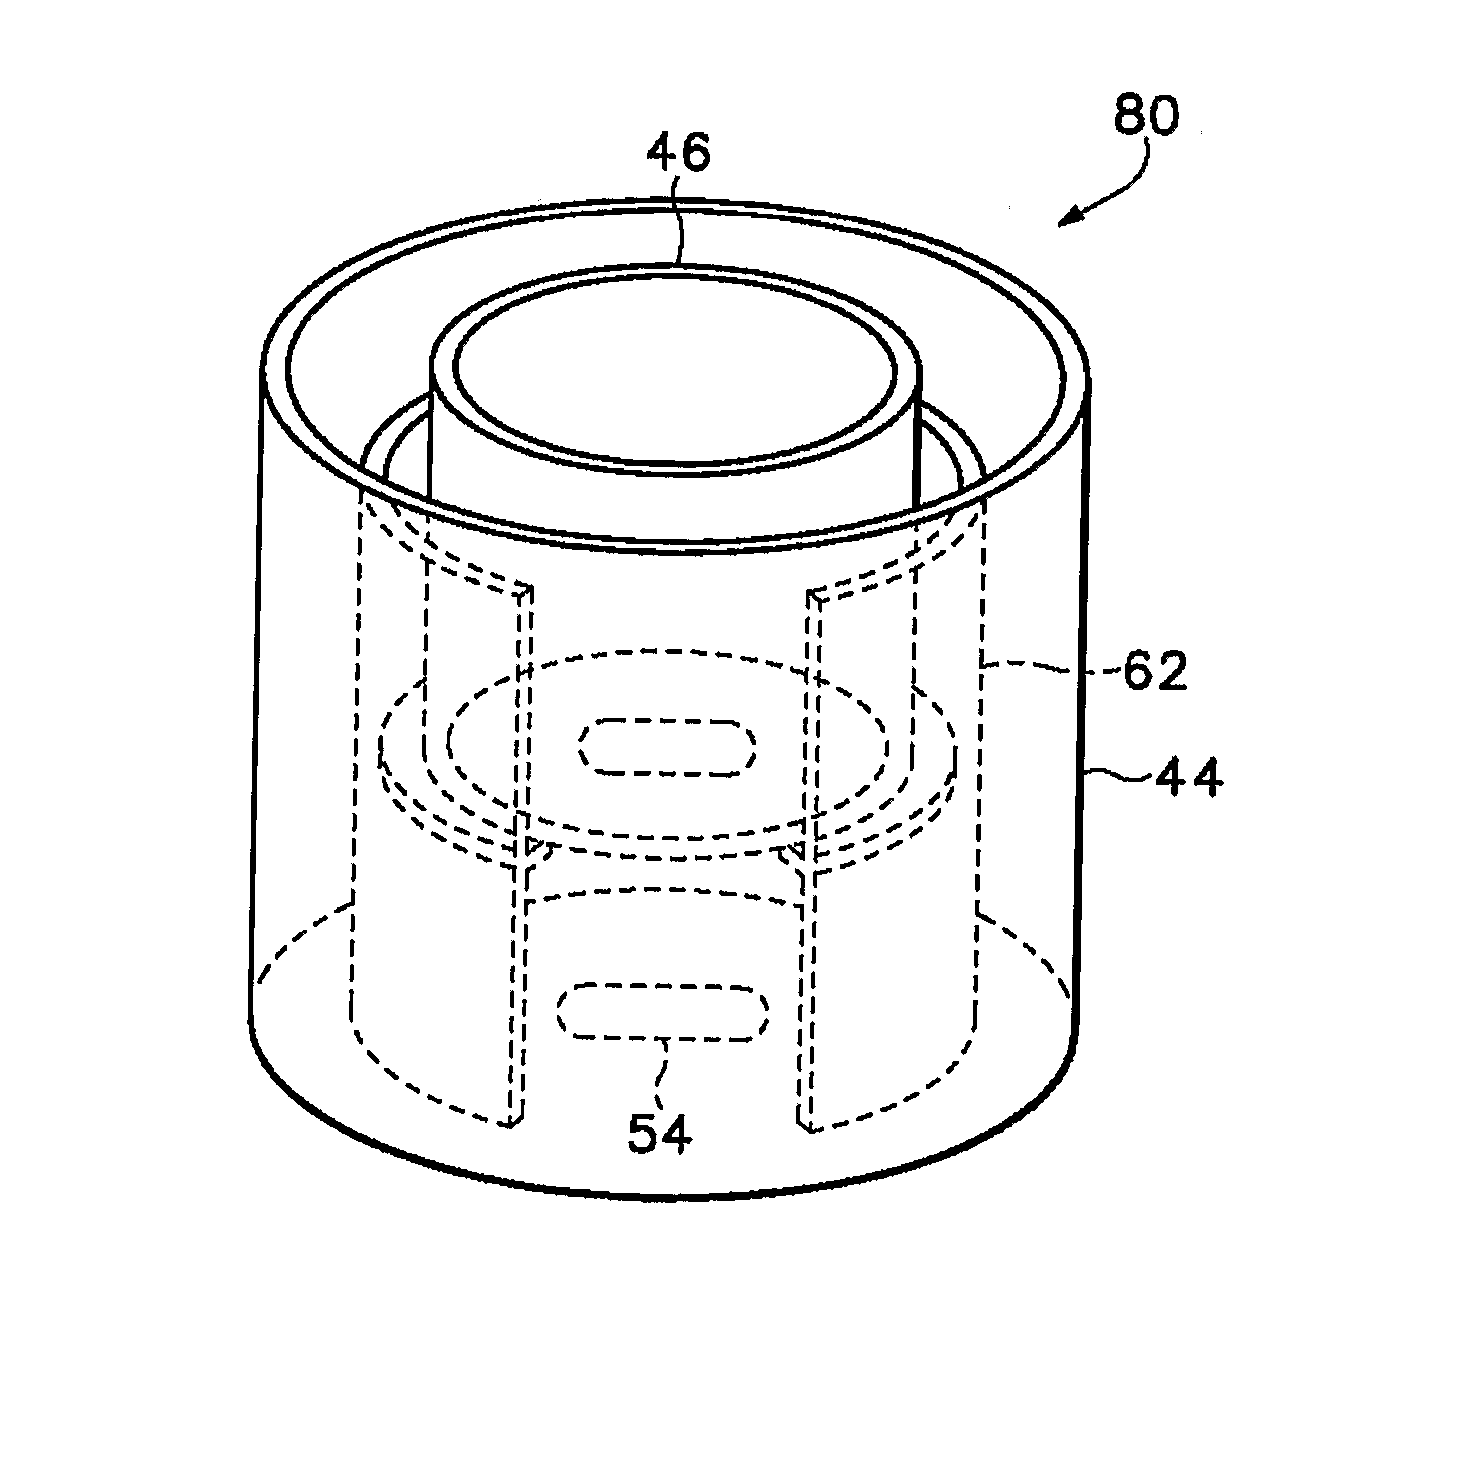 Method And Device For Evaluation Of Pharmaceutical Compositions